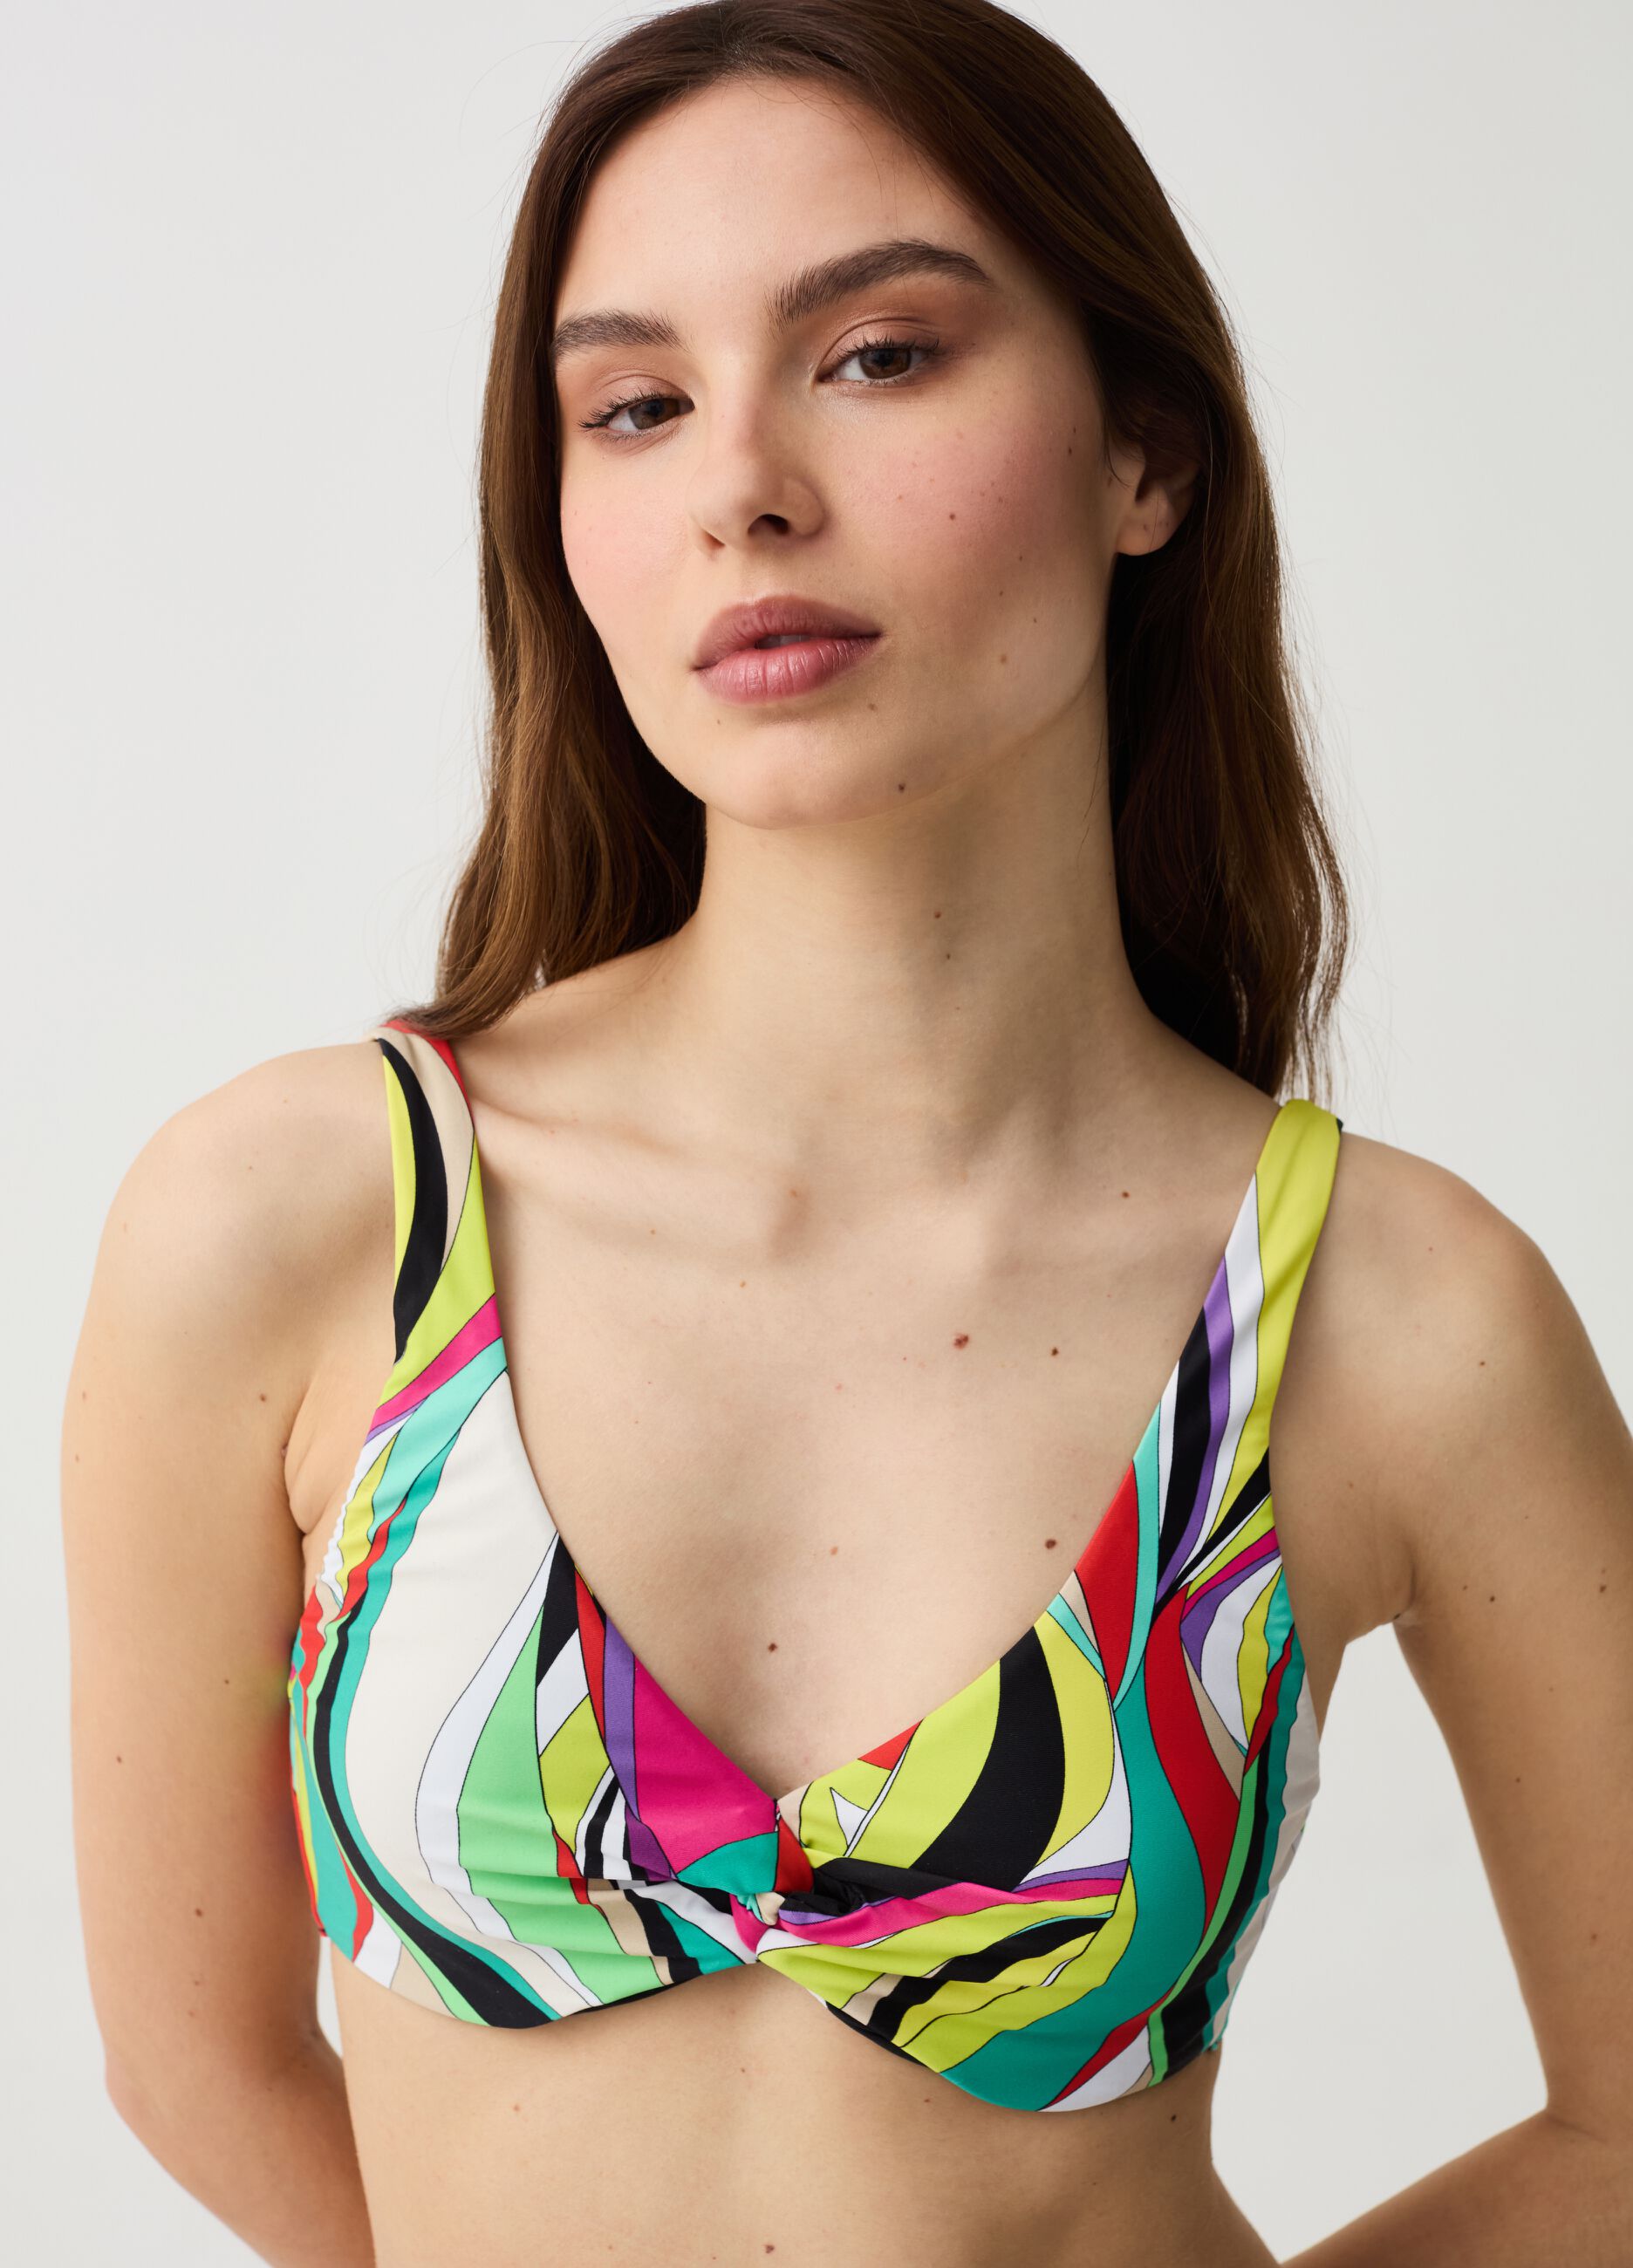 Bikini top with multicoloured patterned tie